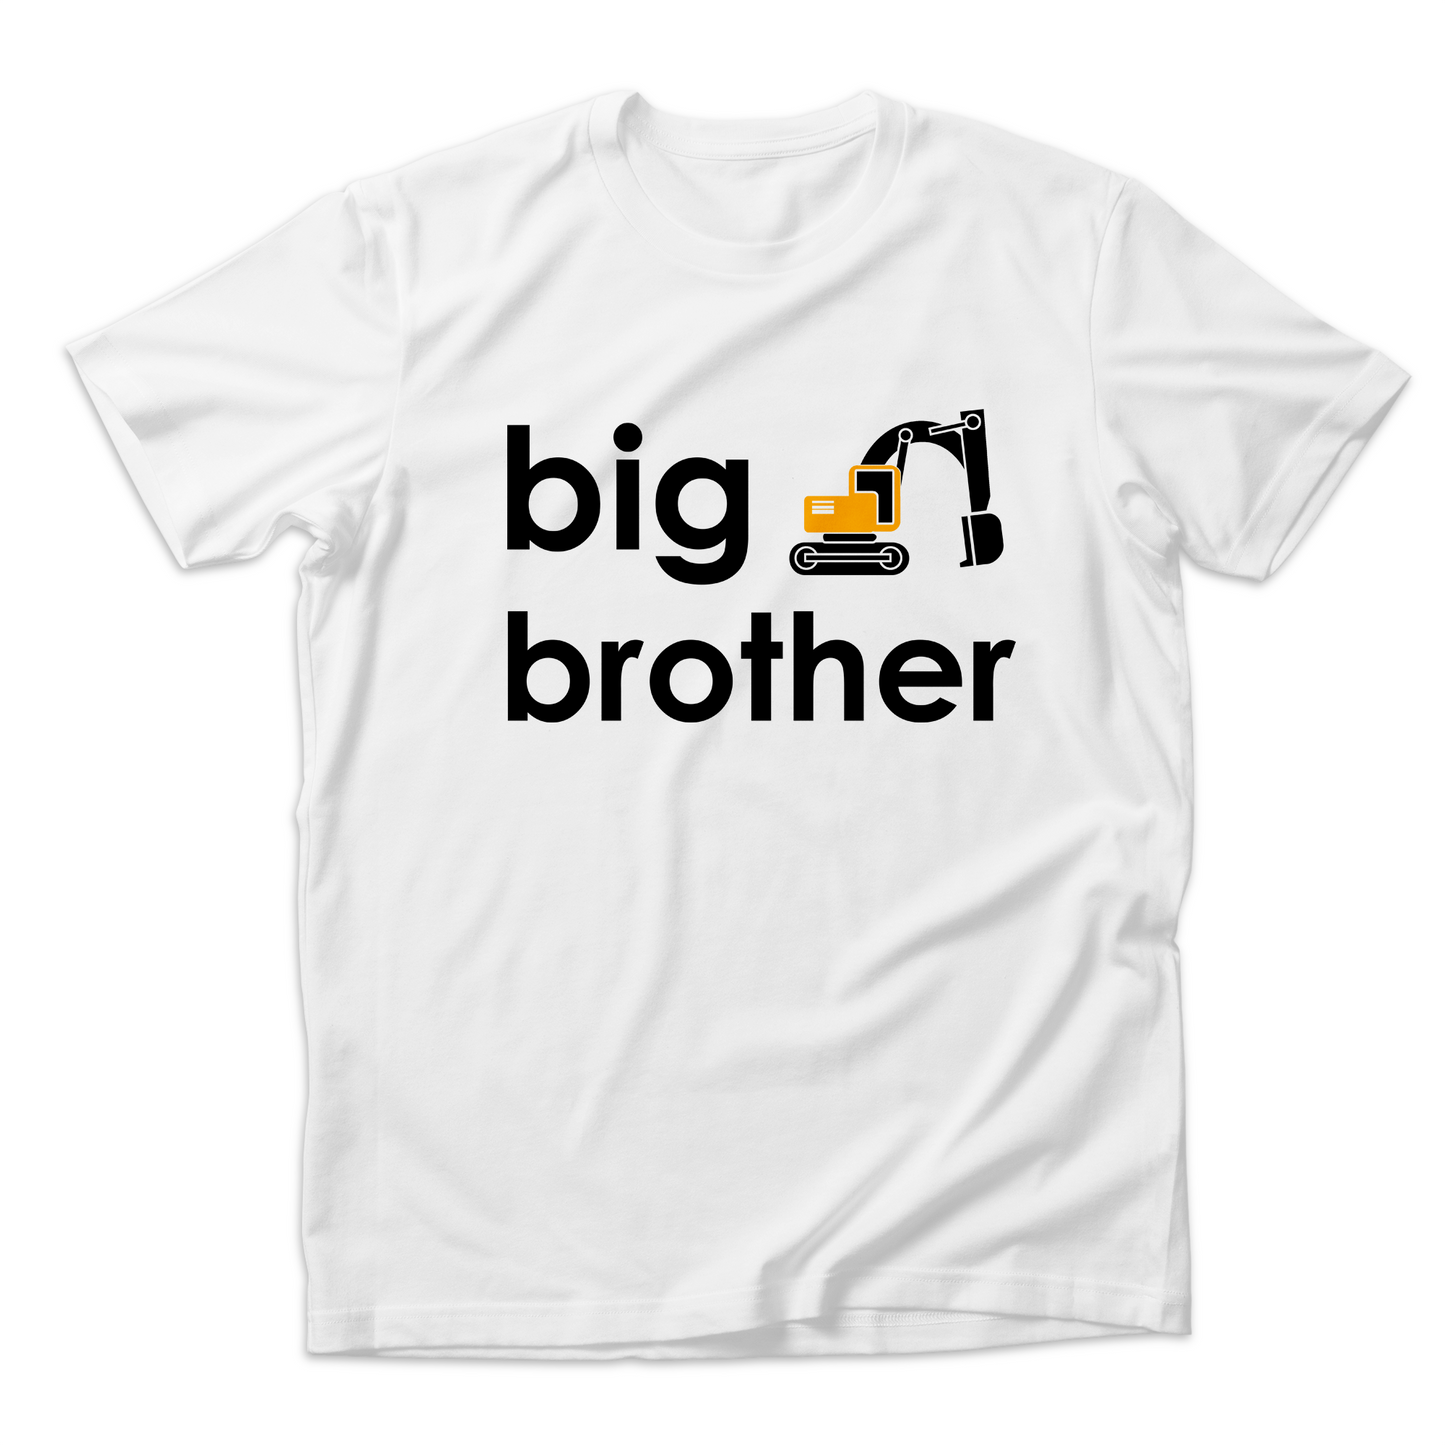 Matching Big Brother & Little Brother Organic Outfit - Trucks